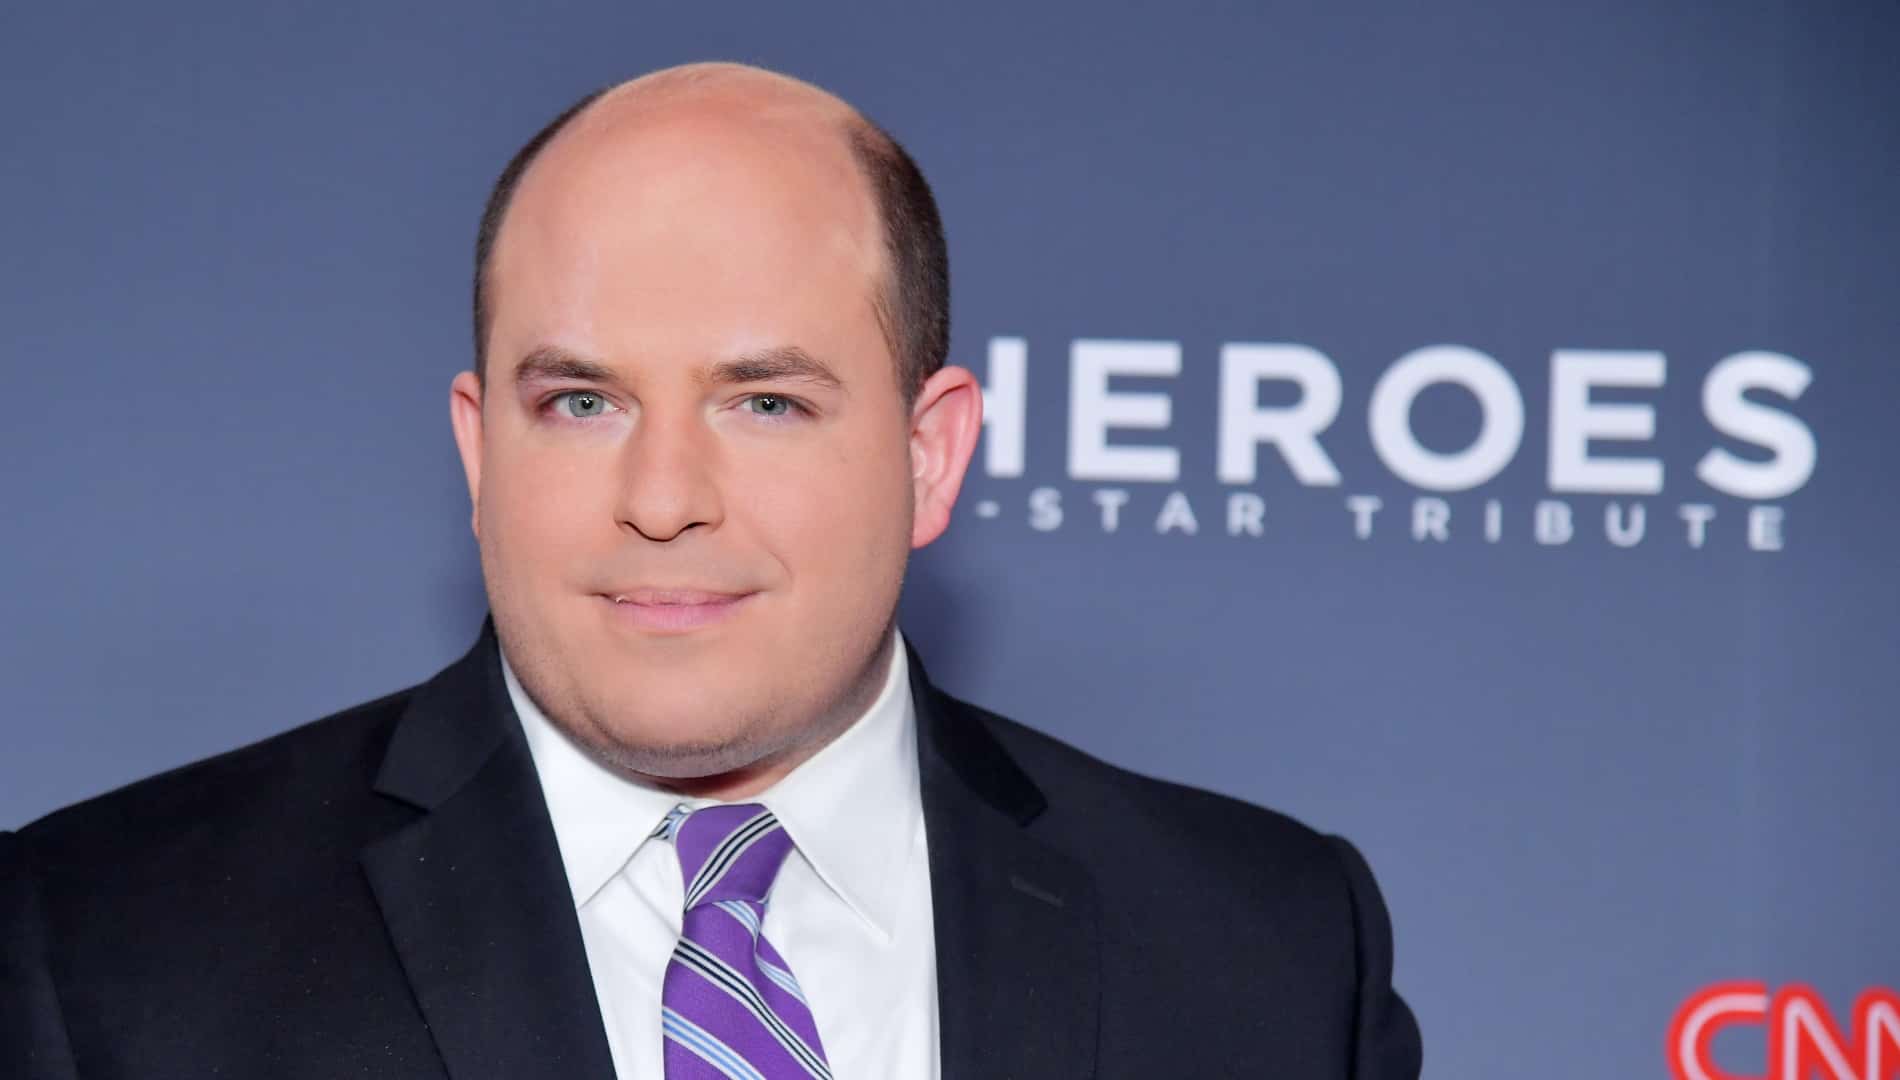 BREAKING: New Management Shakes Things Up, Longtime Host Brian Stelter is OUT And Will No Longer Be With The Network